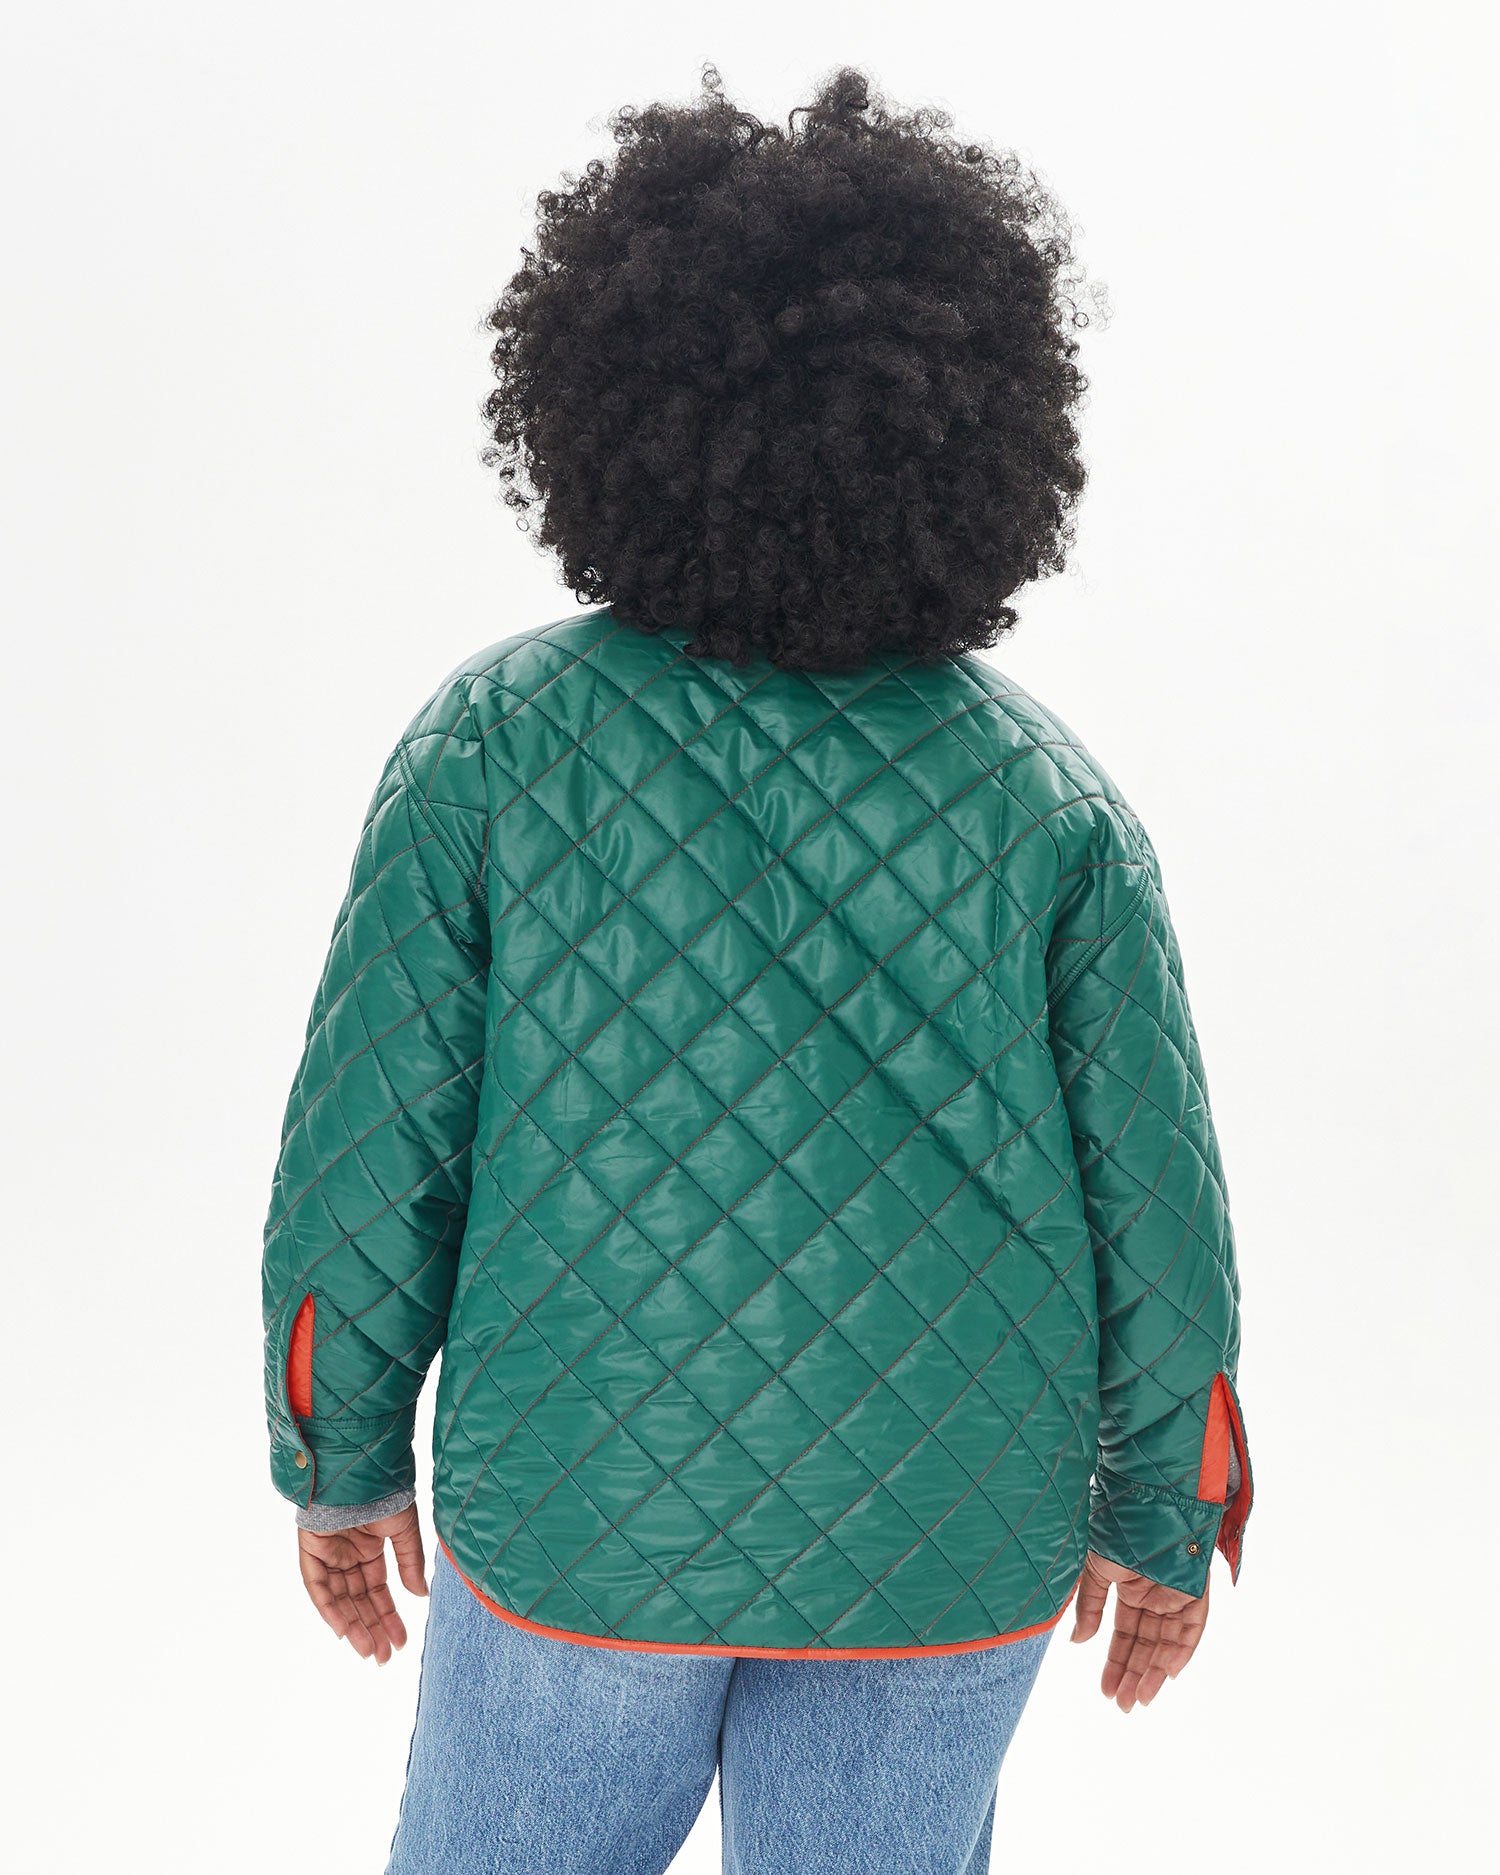 back view of candice wearing the Spruce & Poppy Quilted Nylon Jacque Jacket